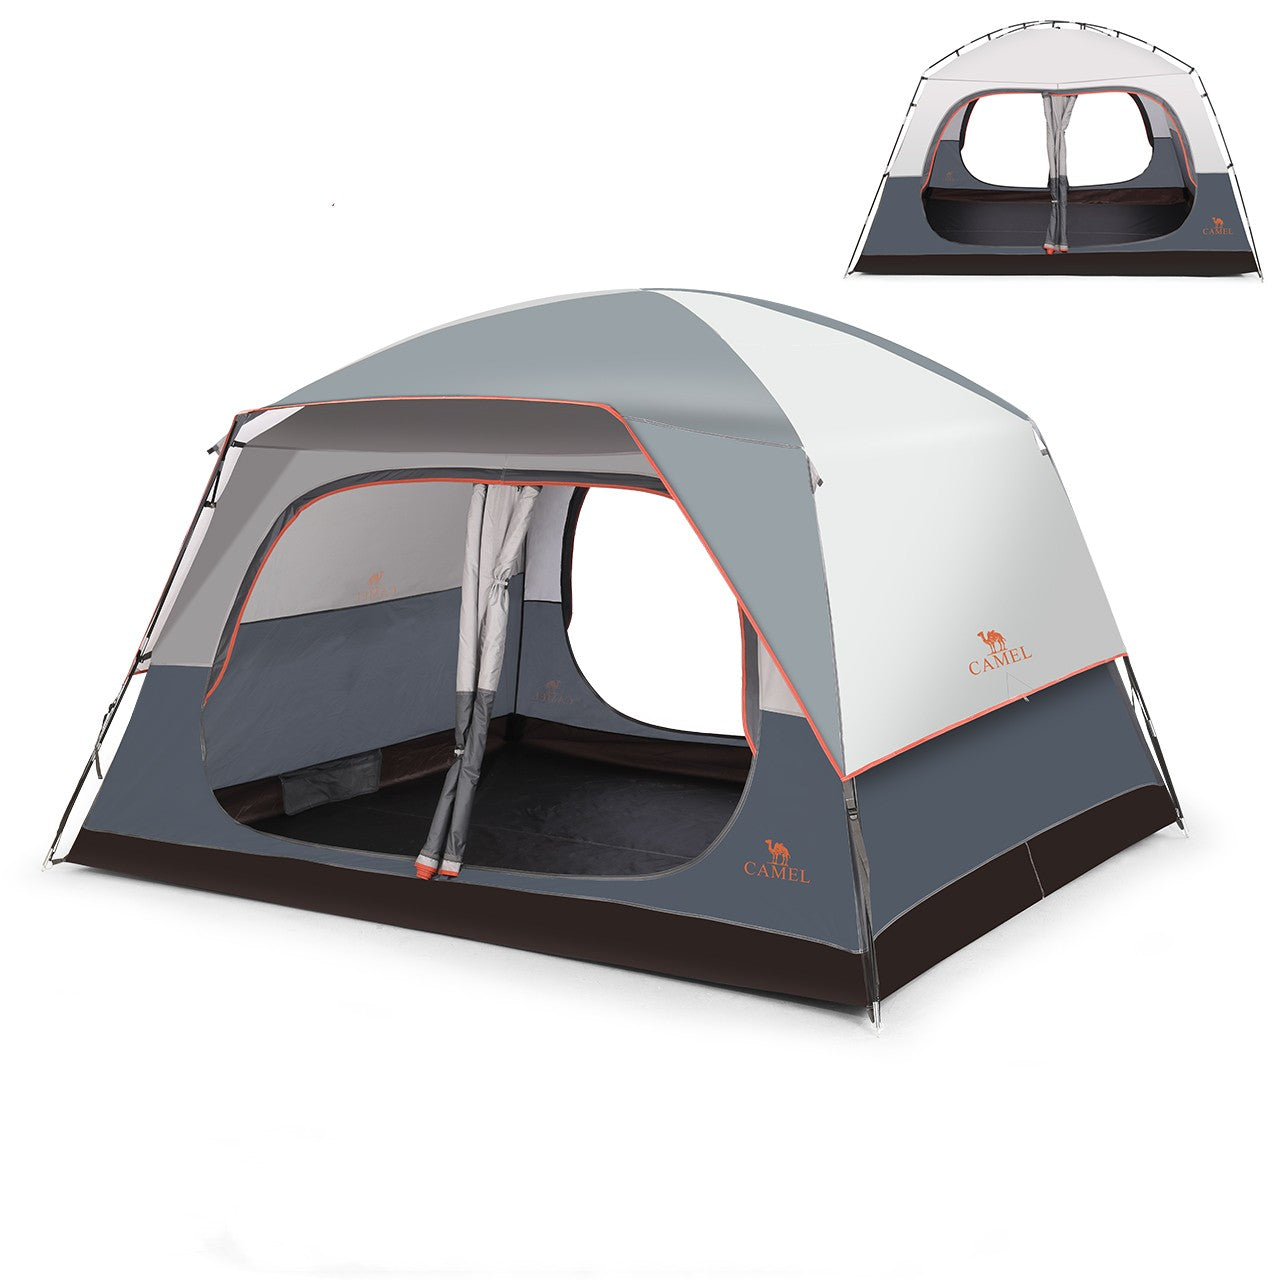 Camel Expedition Dome Tent